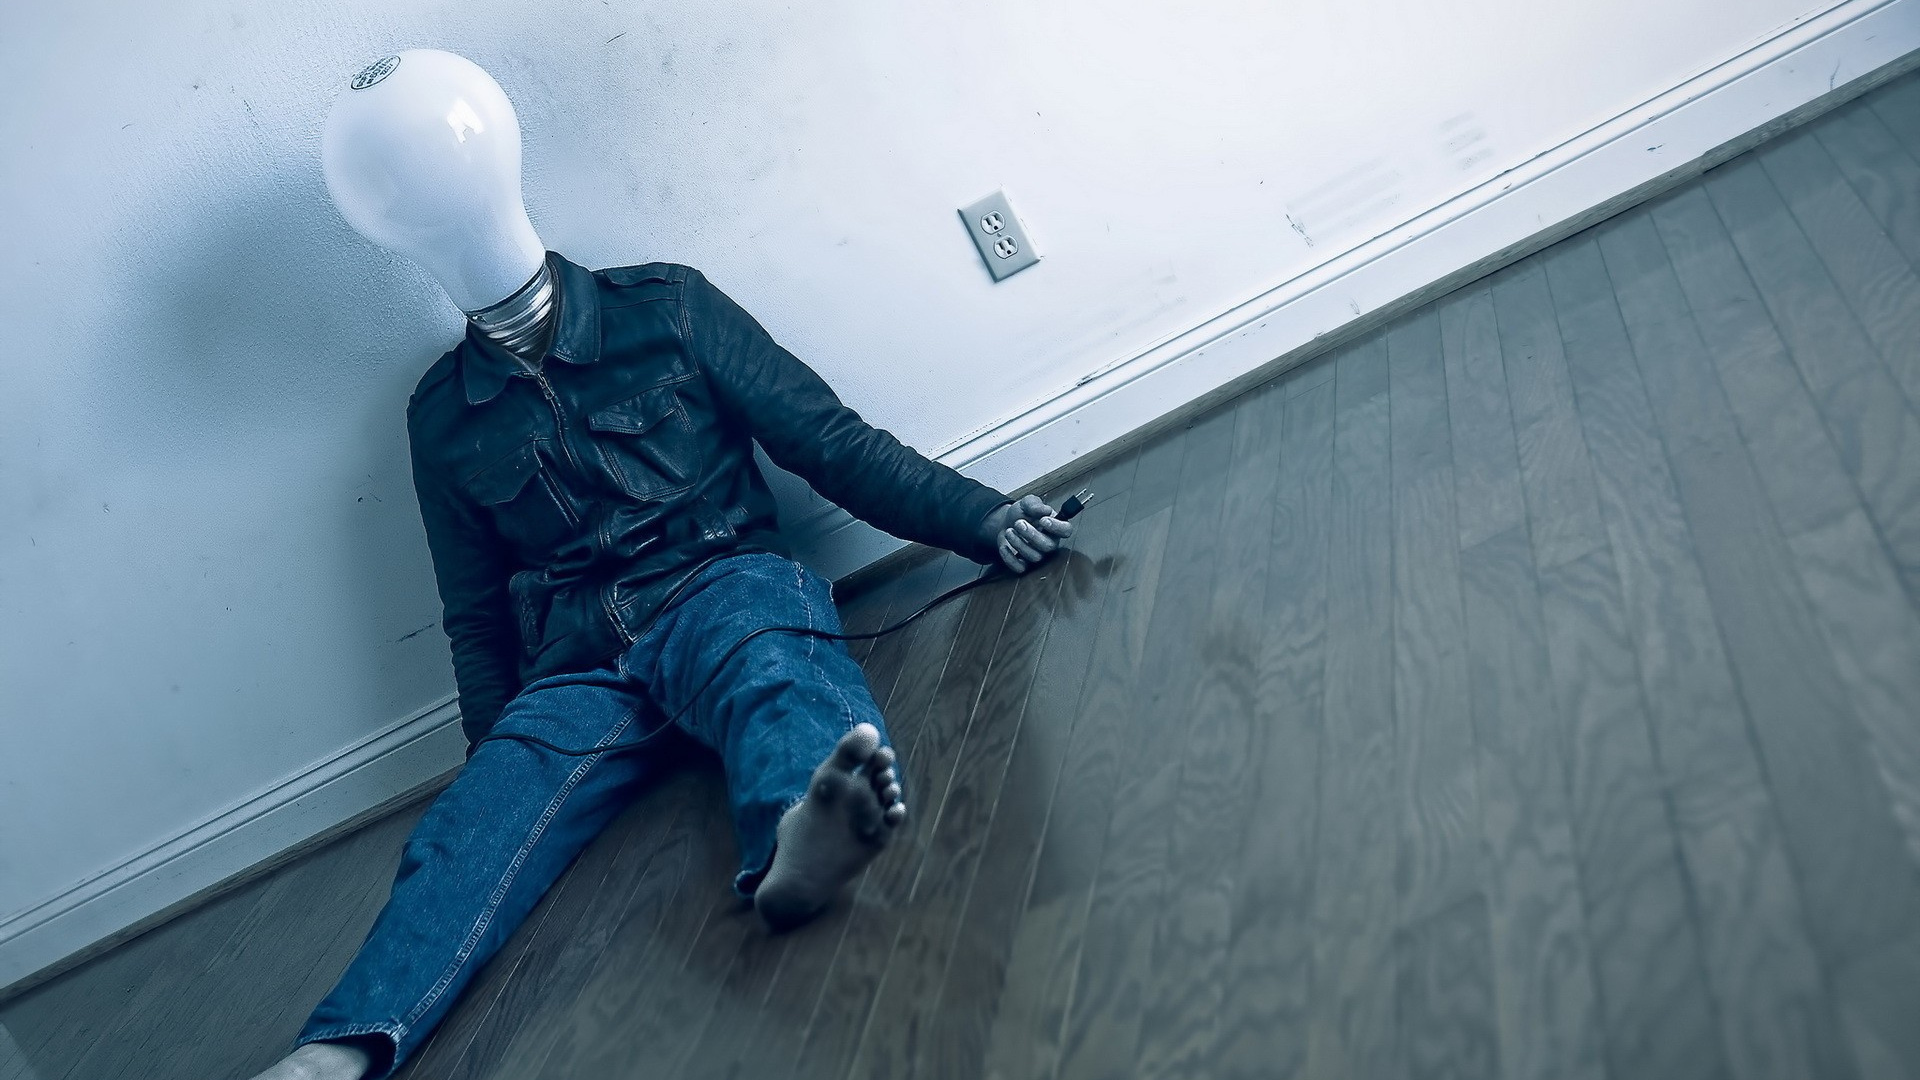 Man in Black Leather Jacket and Blue Denim Jeans Sitting on Floor. Wallpaper in 1920x1080 Resolution